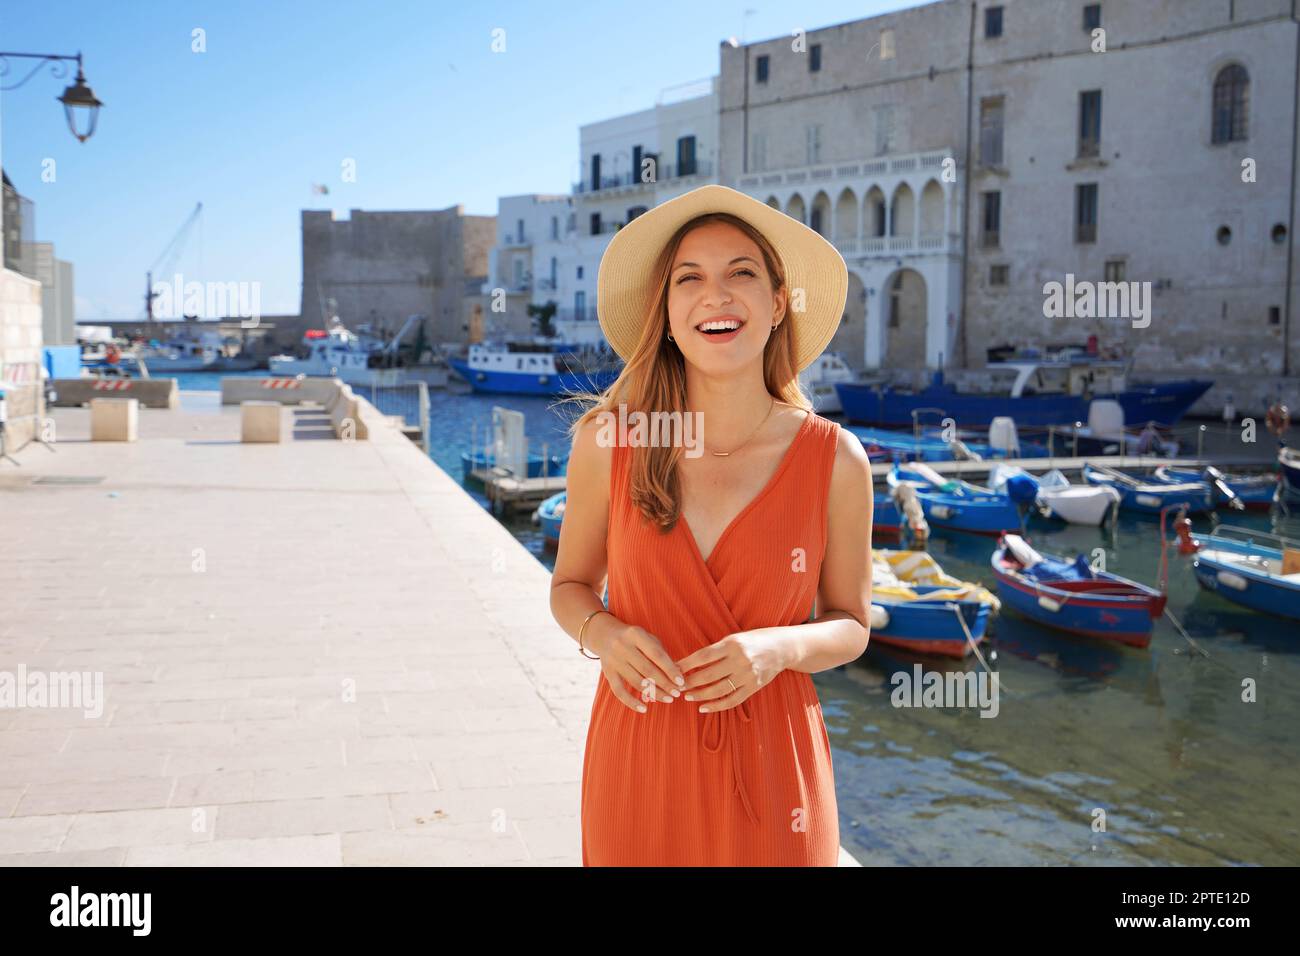 Vacation in Italy. Portrait of tourist woman have fun laughing in historic town of Apulia, Italy. Stock Photo